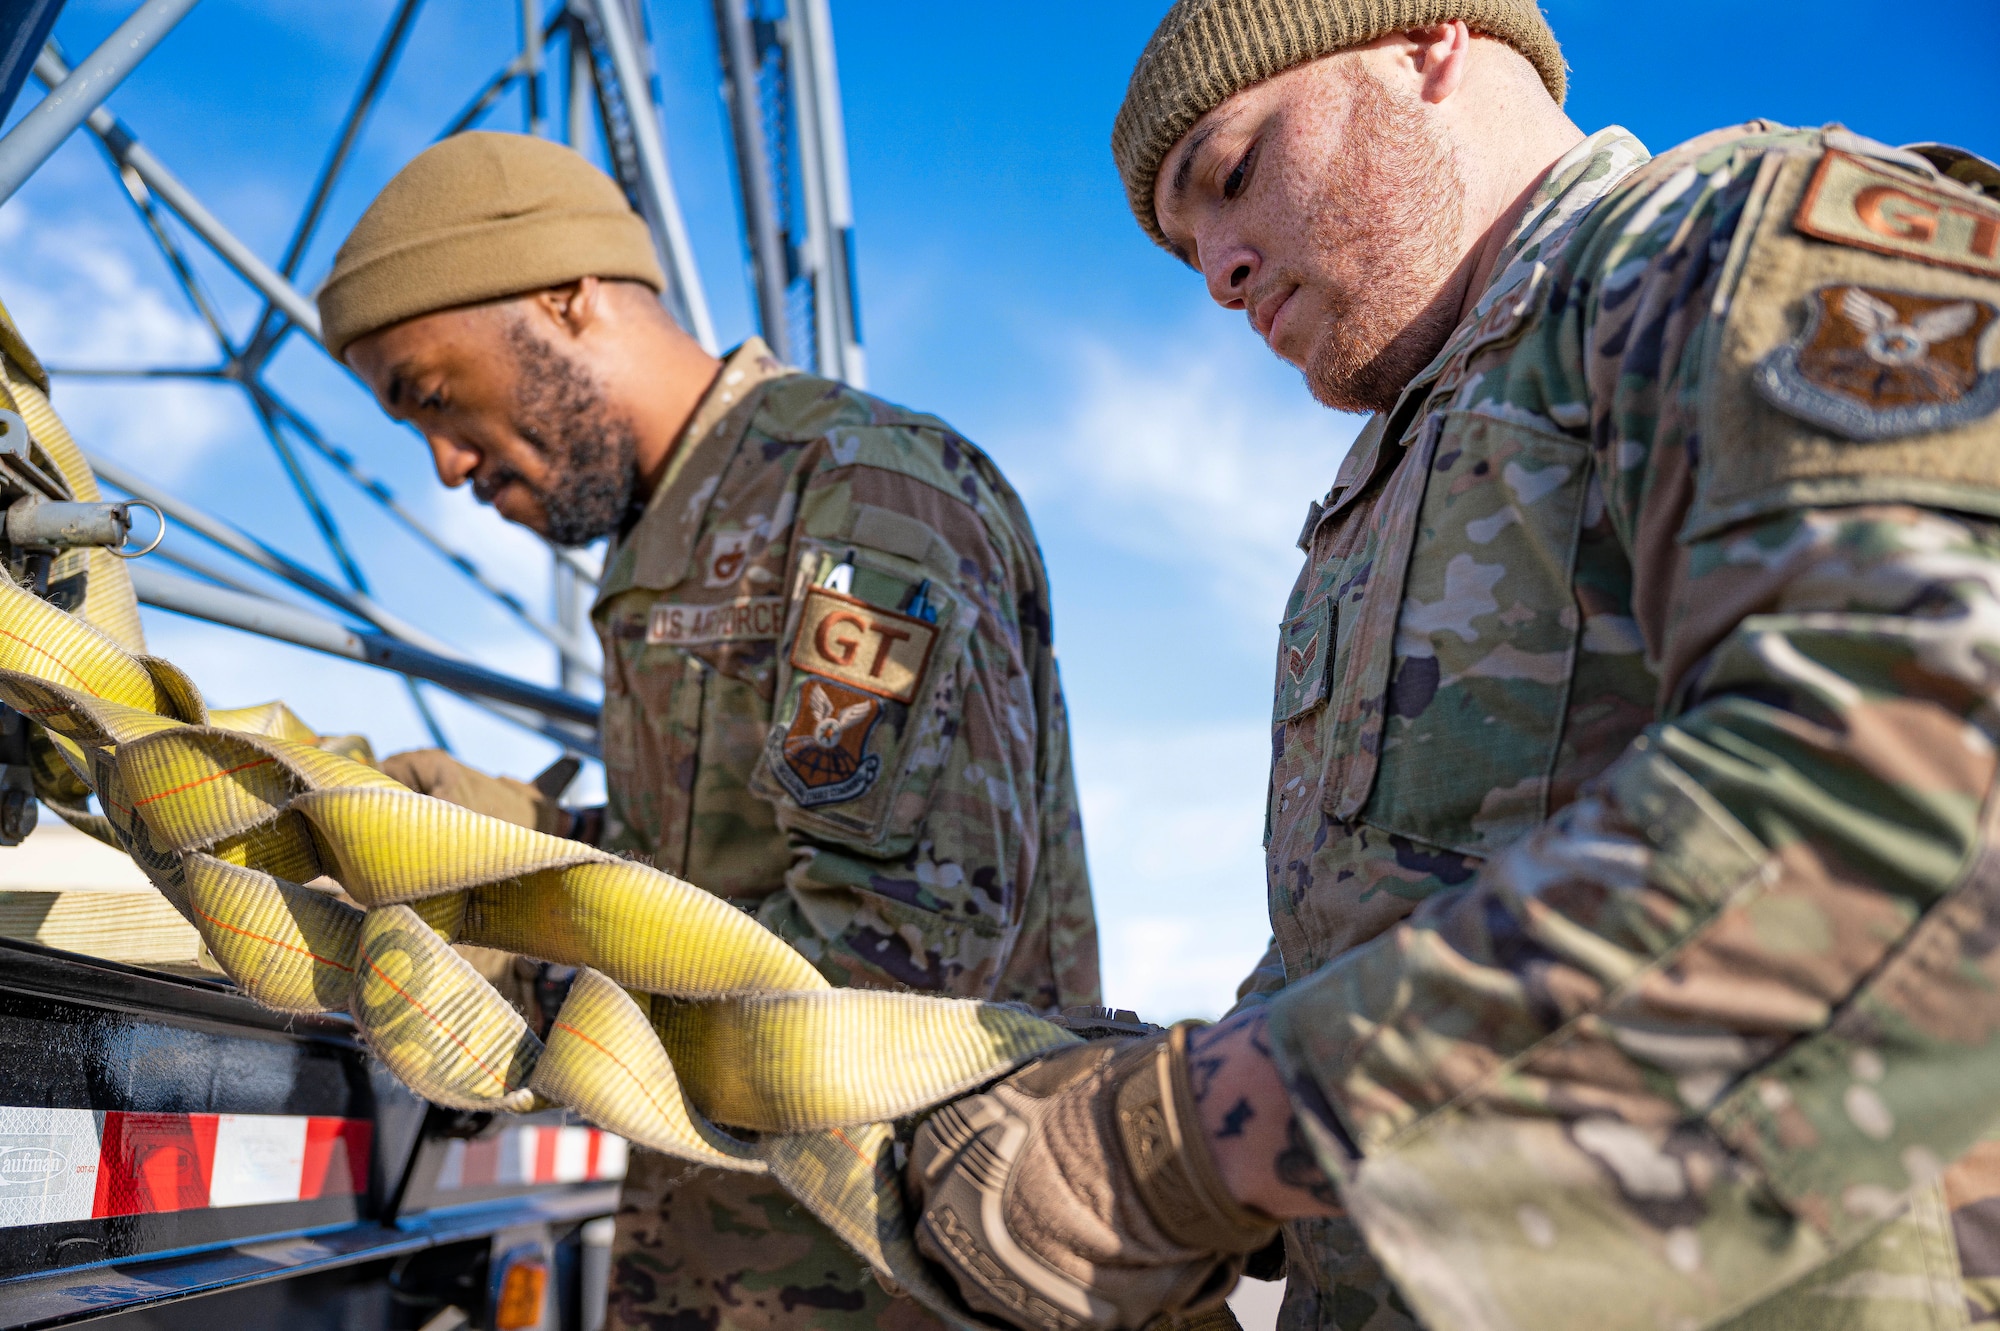 Staff Sgt. Tarvorous Mathews, 7th Logistic Readiness Squadron ground transportation specialist, left, and Senior Airman Luis Torres-Santos, 7th LRS ground transportation support operator, tighten cargo straps holding two B-5 aircraft maintenance stands at Dyess Air Force Base, Texas, Jan. 6, 2023. Airmen assigned to the 7th LRS and 7th Equipment Maintenance Squadron worked together to transport the two maintenance stands to fulfill a short notice tasking. (U.S. Air Force photo by Senior Airman Colin Hollowell)